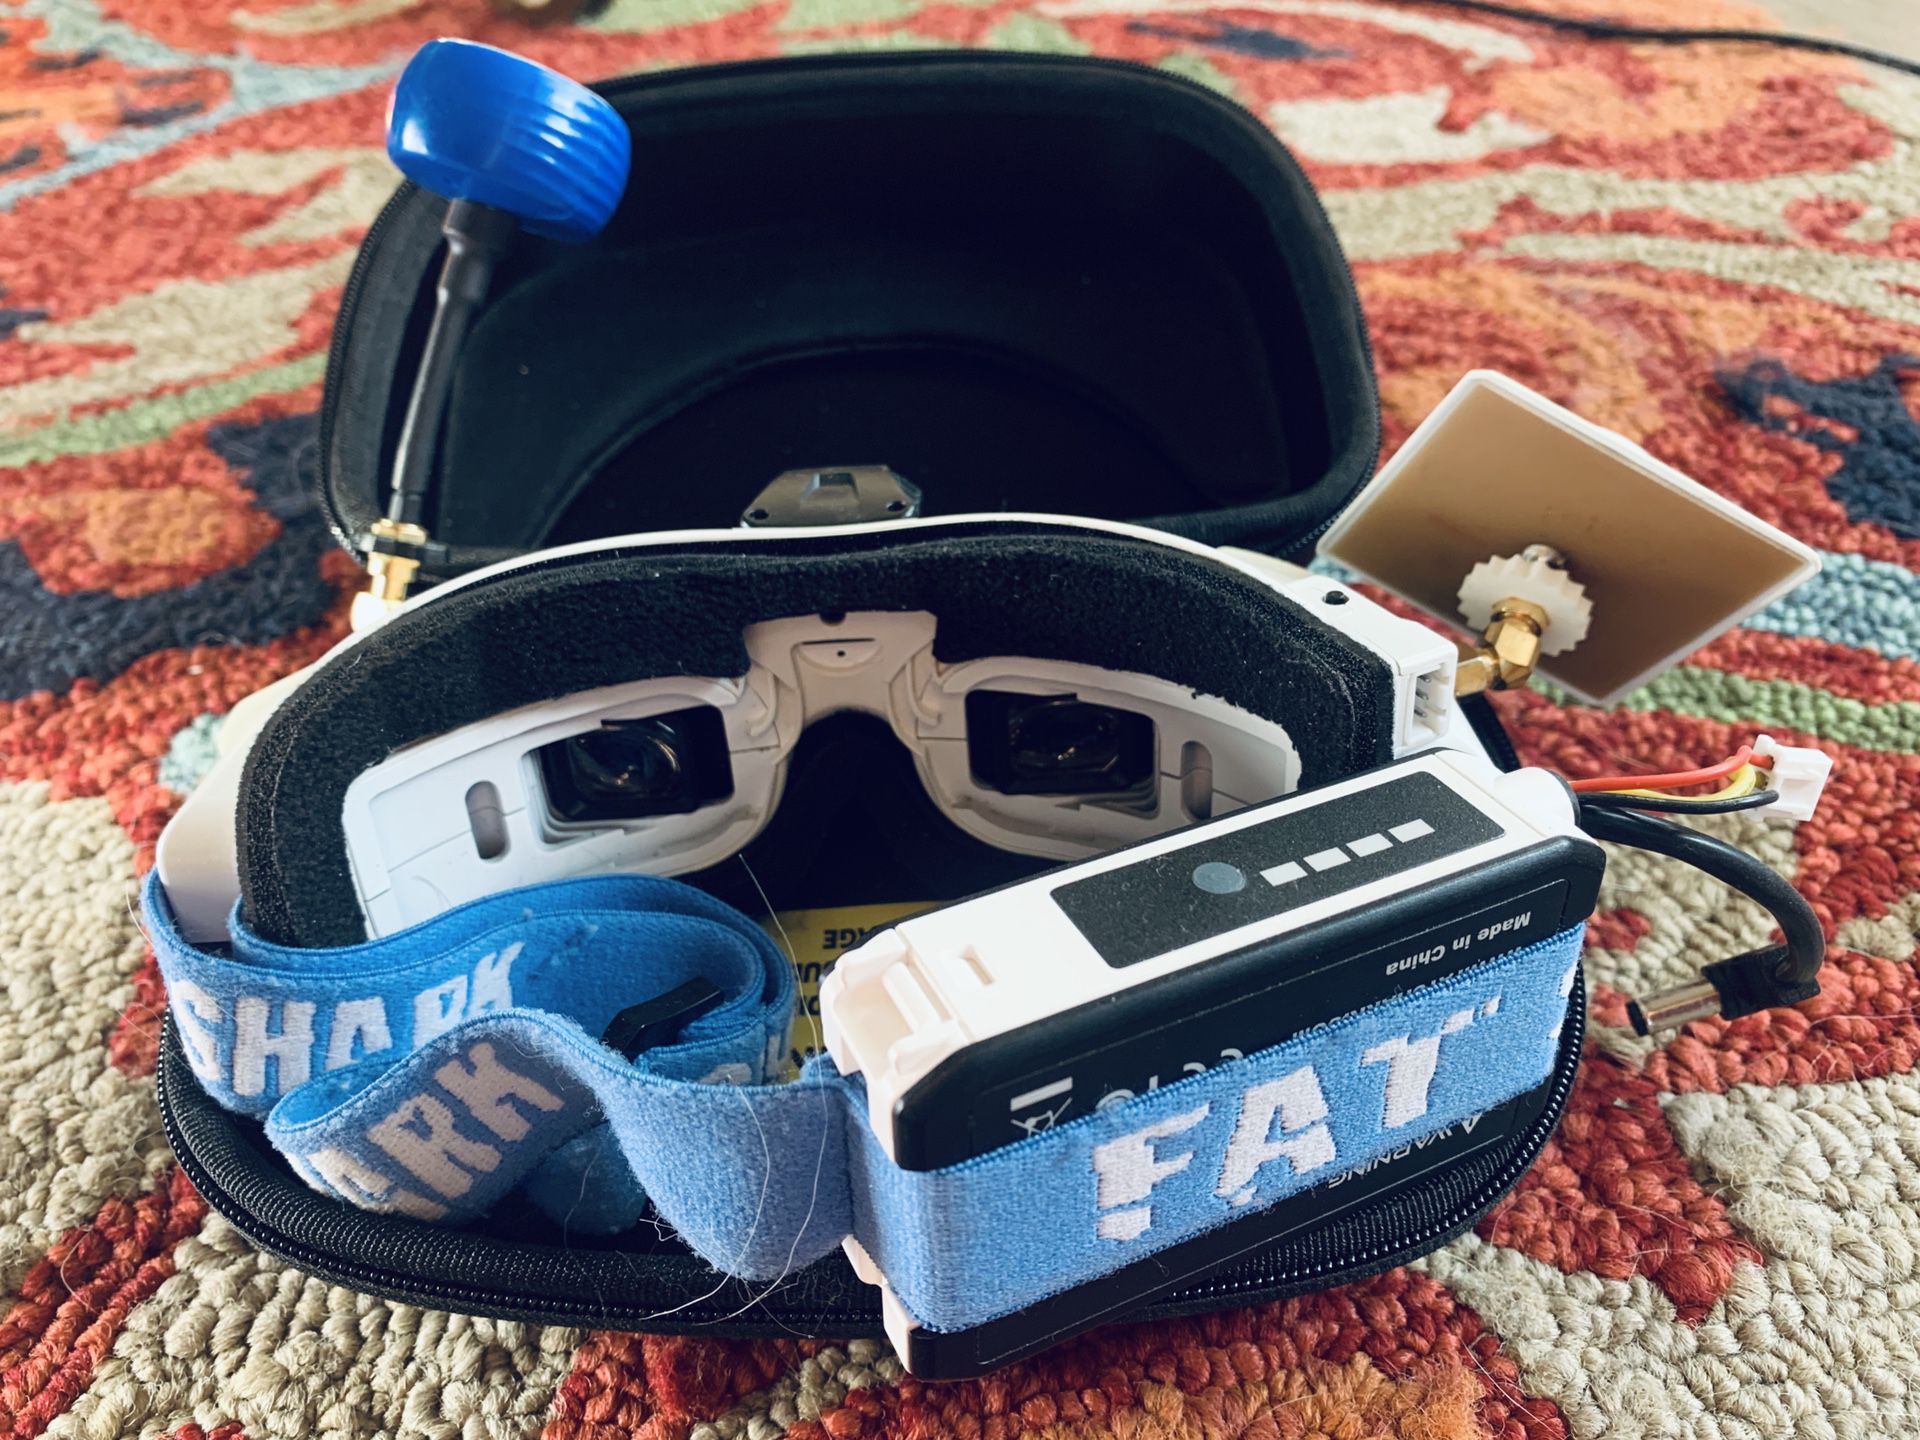 Fat Shark FPV Goggles + La Forge diversity module, comes with extra batteries